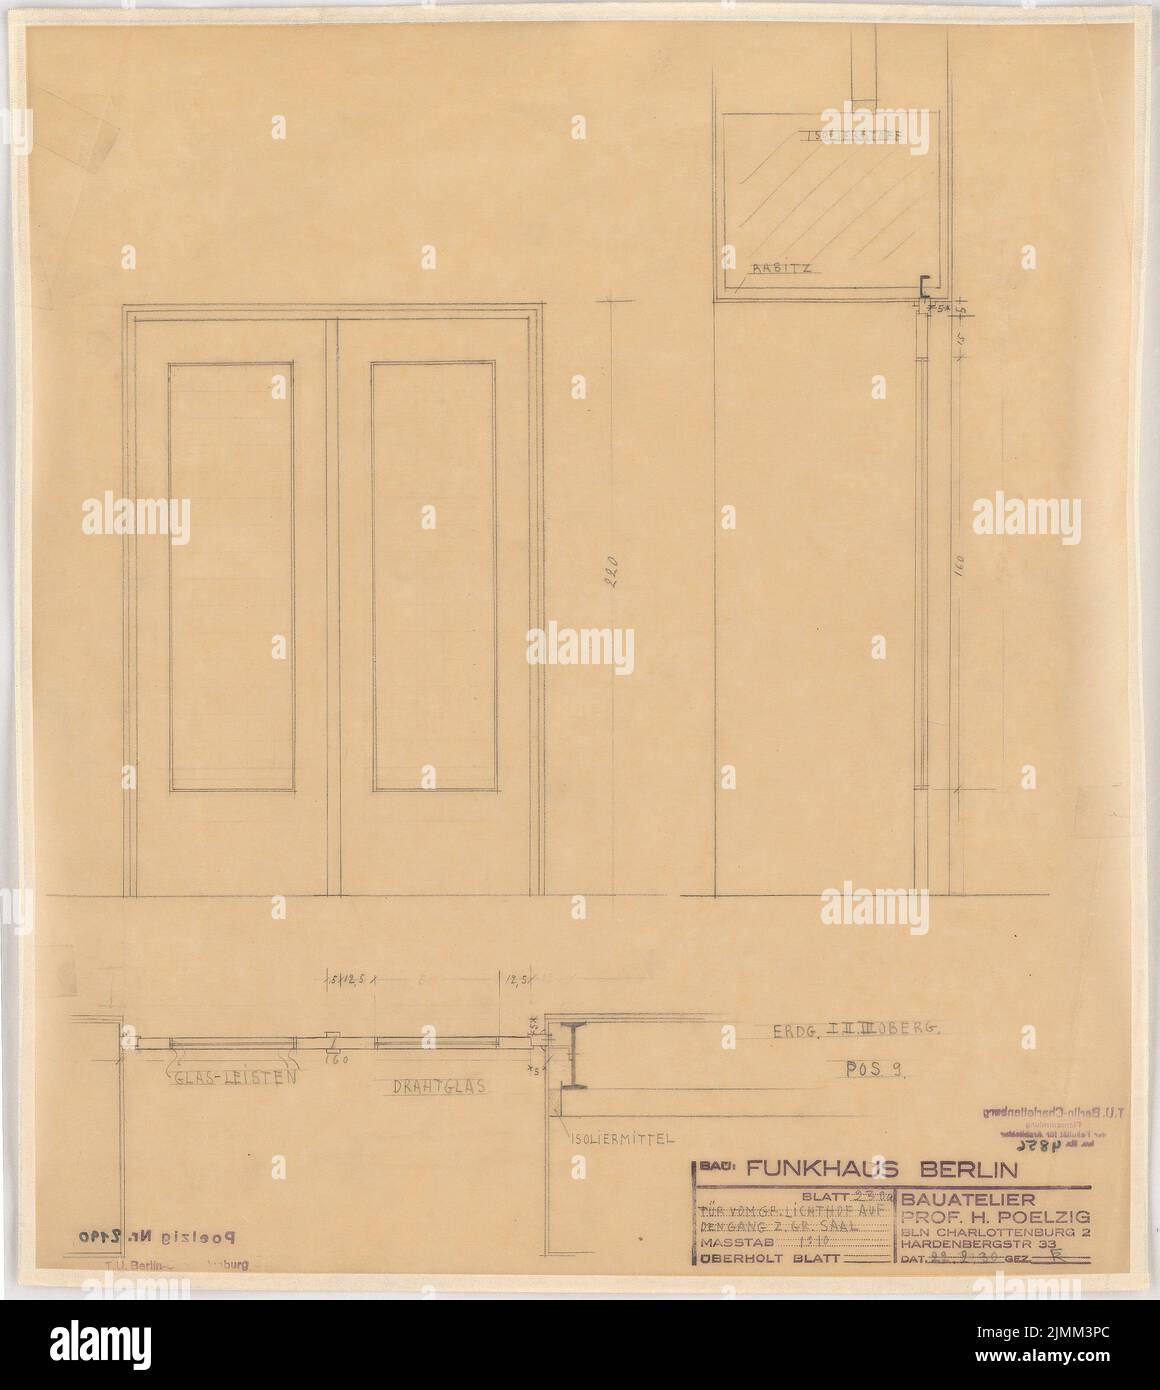 Poelzig Hans (1869-1936), Haus des Rundfunk, Berlin (22.02.1930): Execution project, Großer Lichthof, door to go to the big hall, tort, floor plan, average 1:10. Pencil on transparent, 48.2 x 43 cm (including scan edges) Stock Photo